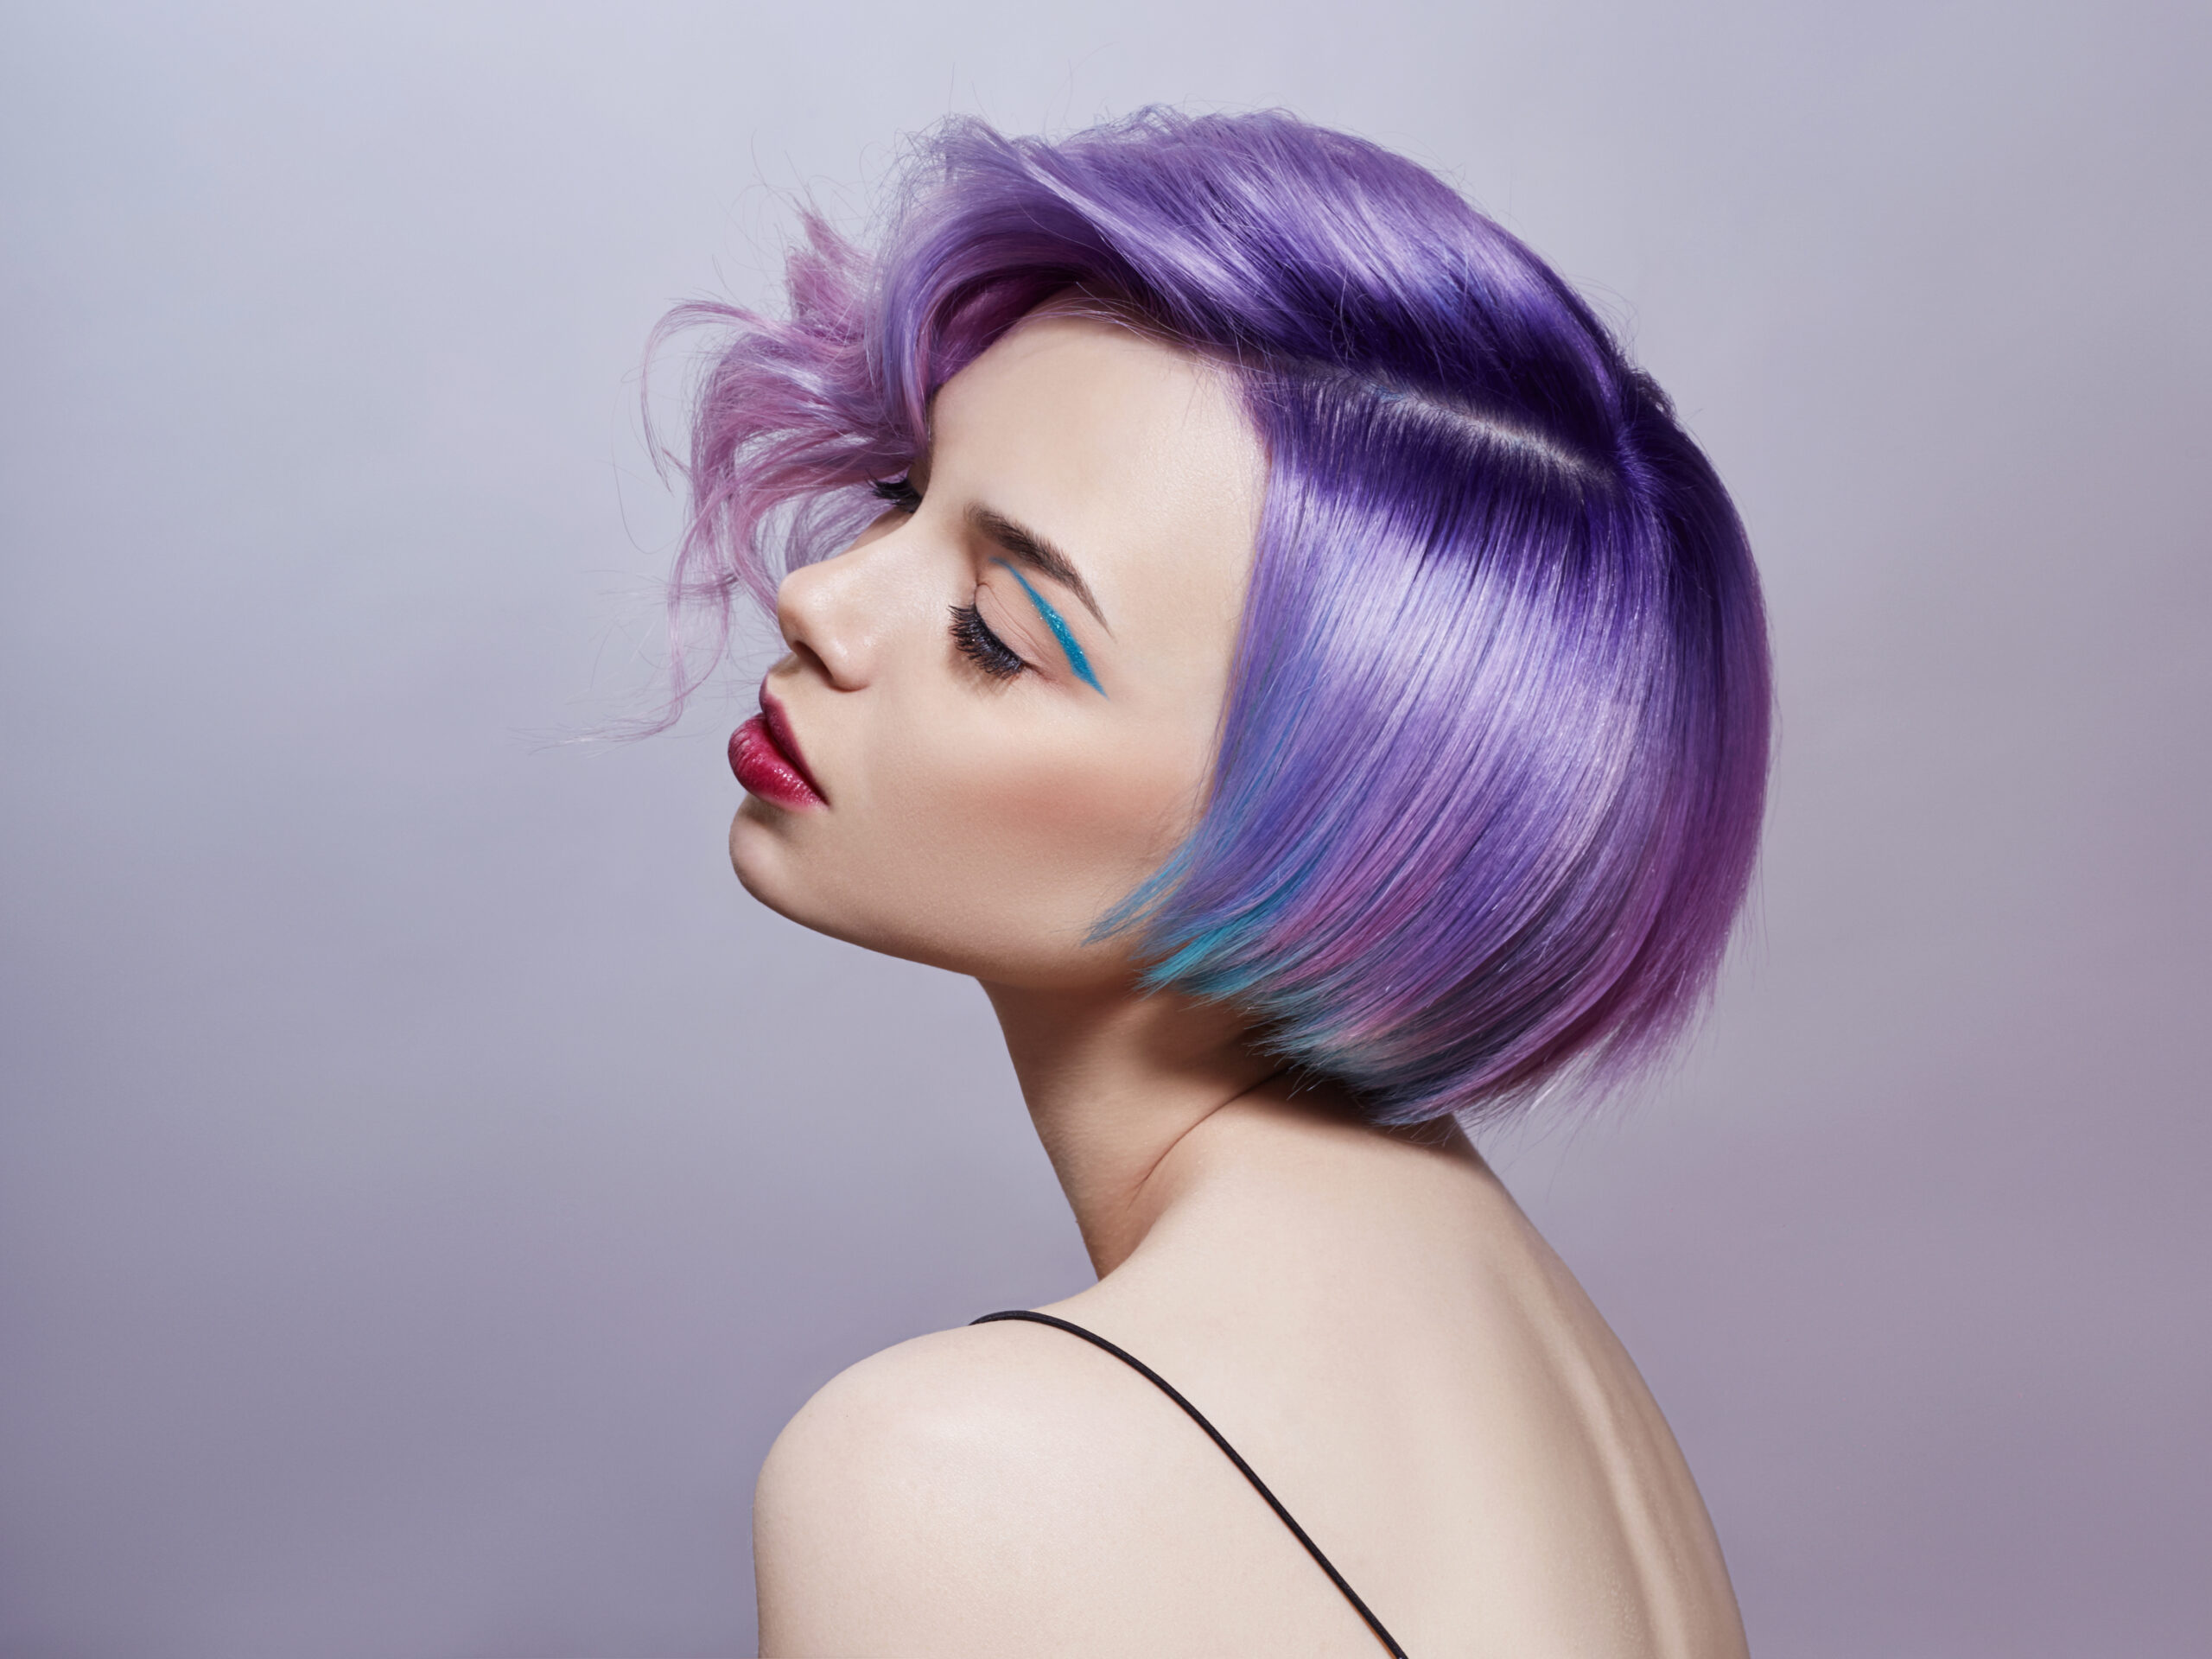 woman with purple and blue hair